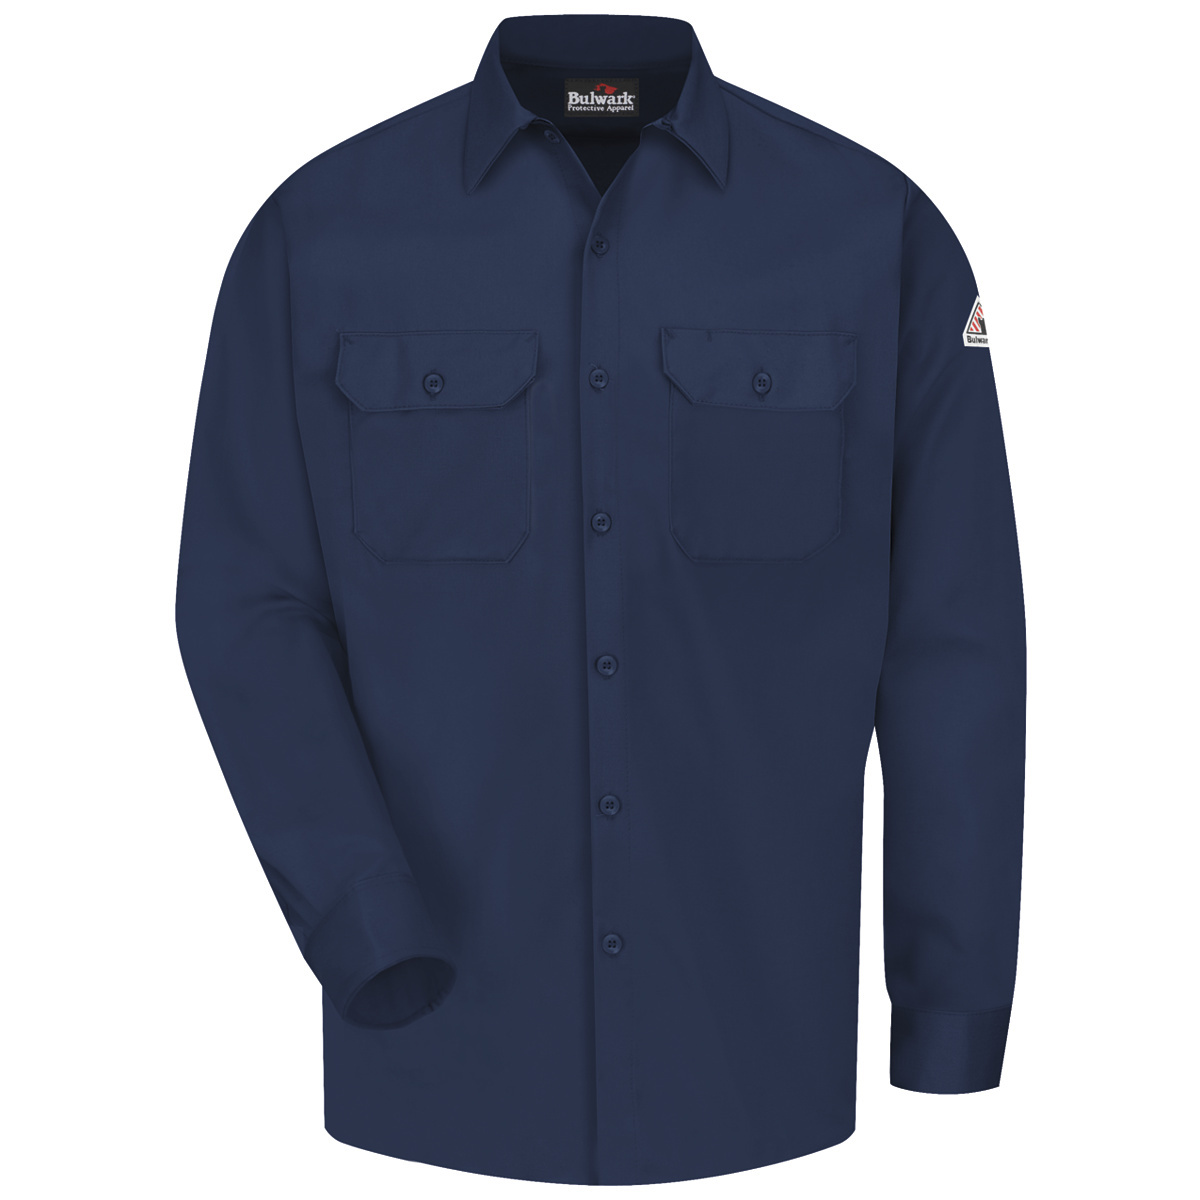 Bulwark® 4X Tall Navy Blue Westex Ultrasoft®/Cotton/Nylon Flame Resistant Work Shirt With Button Front Closure